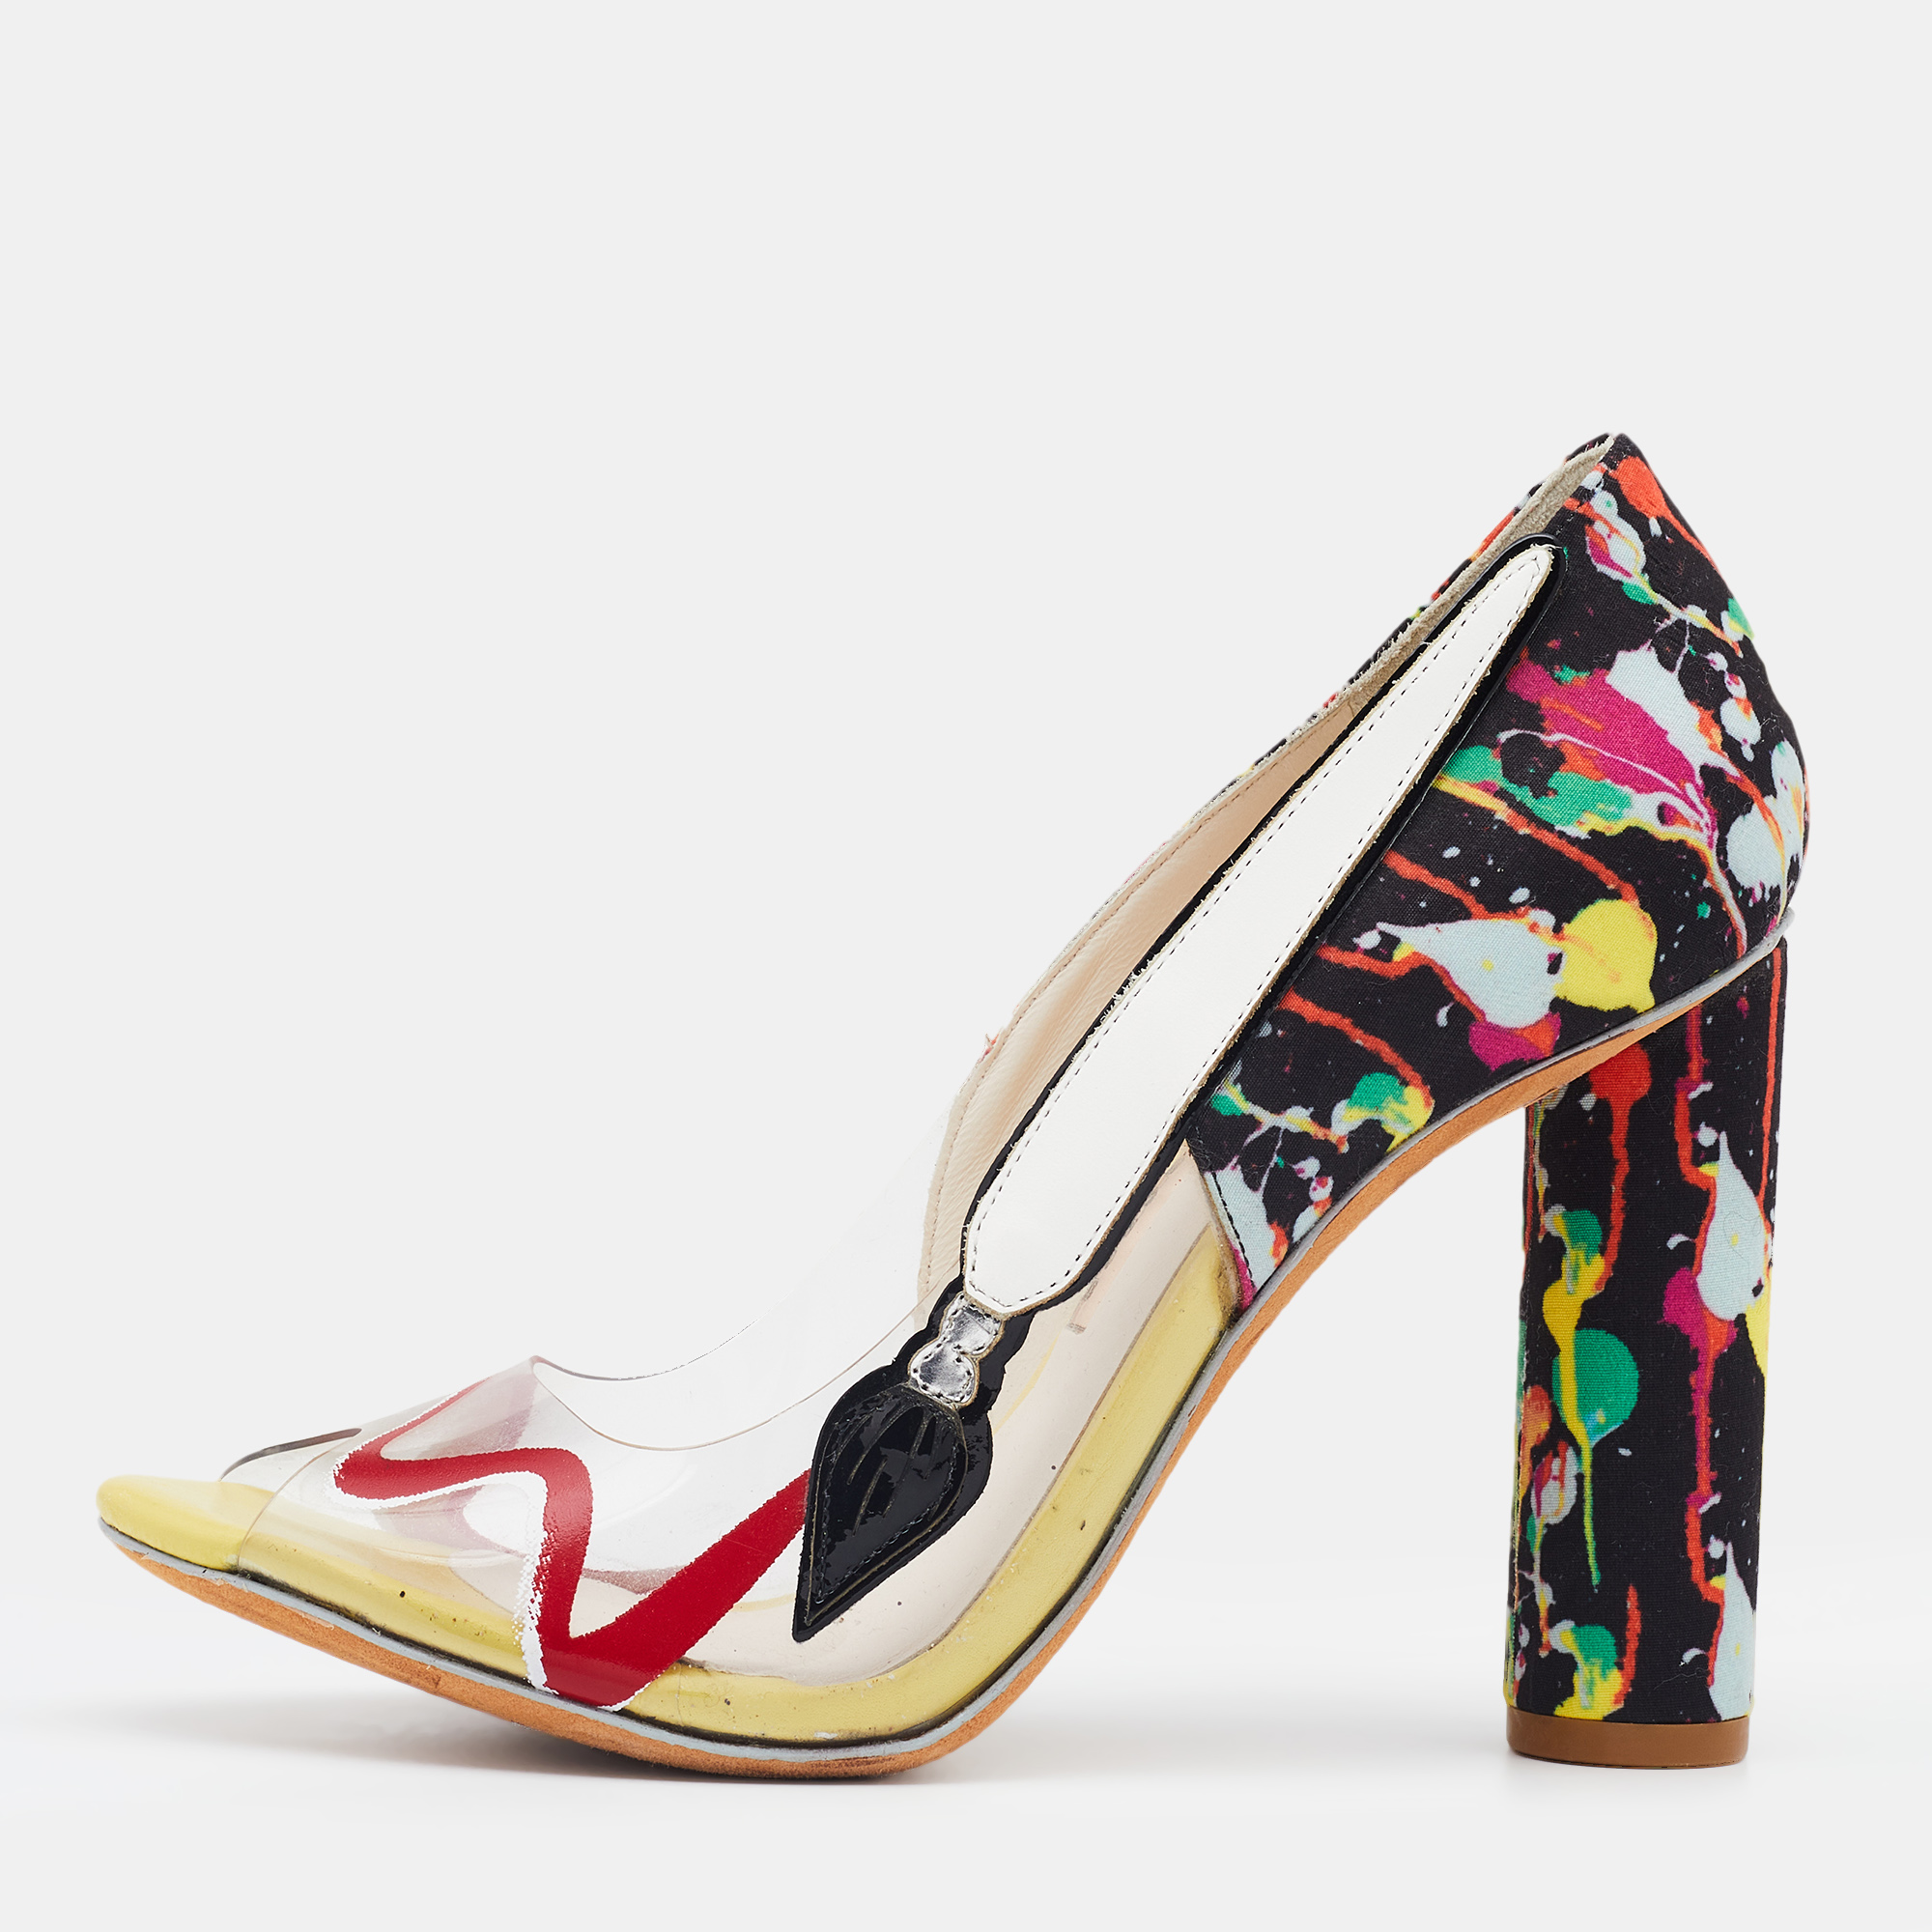 Sophisticated and elegant these Party Like Pollock pumps from Sophia Webster are all about high fashion and style. Crafted from multicolored PVC and fabric on the exterior these pumps showcase 10 cm heels peep toes and a slip on style. Look your stylish best as you pair these pretty pumps with your outfit.